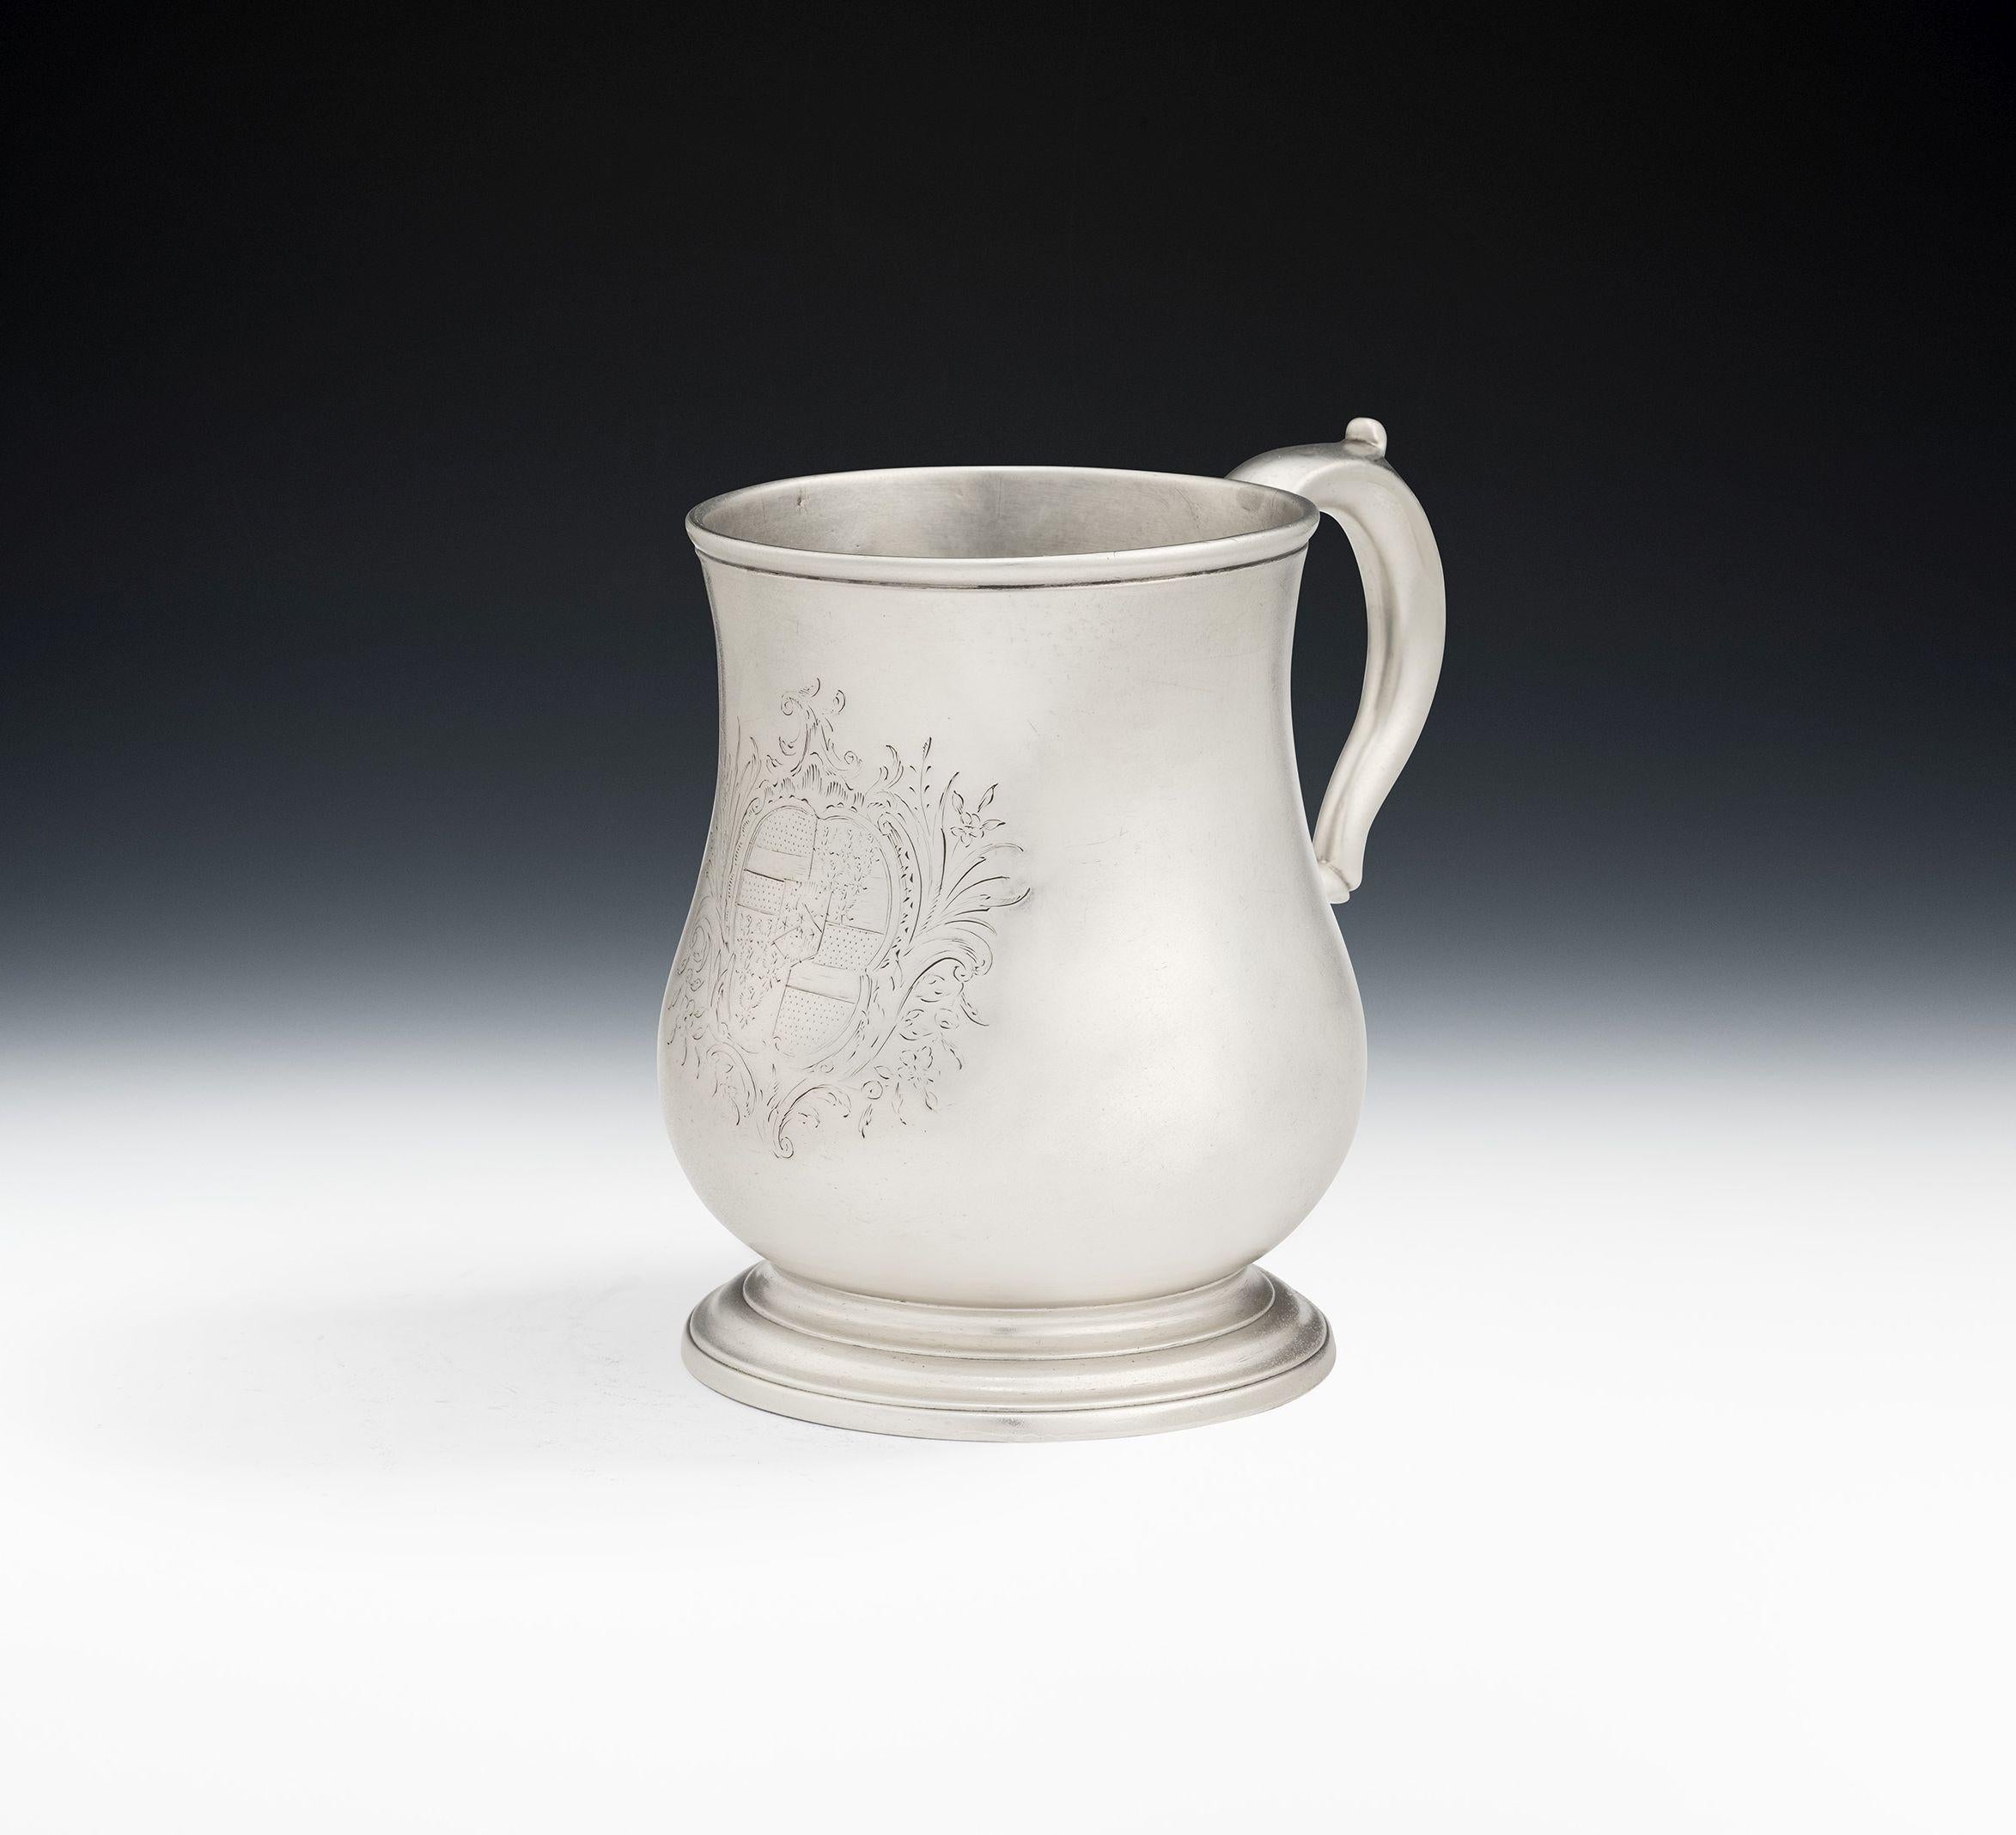 This fine mug stands on an applied circular foot and has a baluster main body and everted rim. This piece has a scroll handle and the front is engraved with a contemporary Armorial surrounded by a floral and foliate spray cartouche. The mug is fully